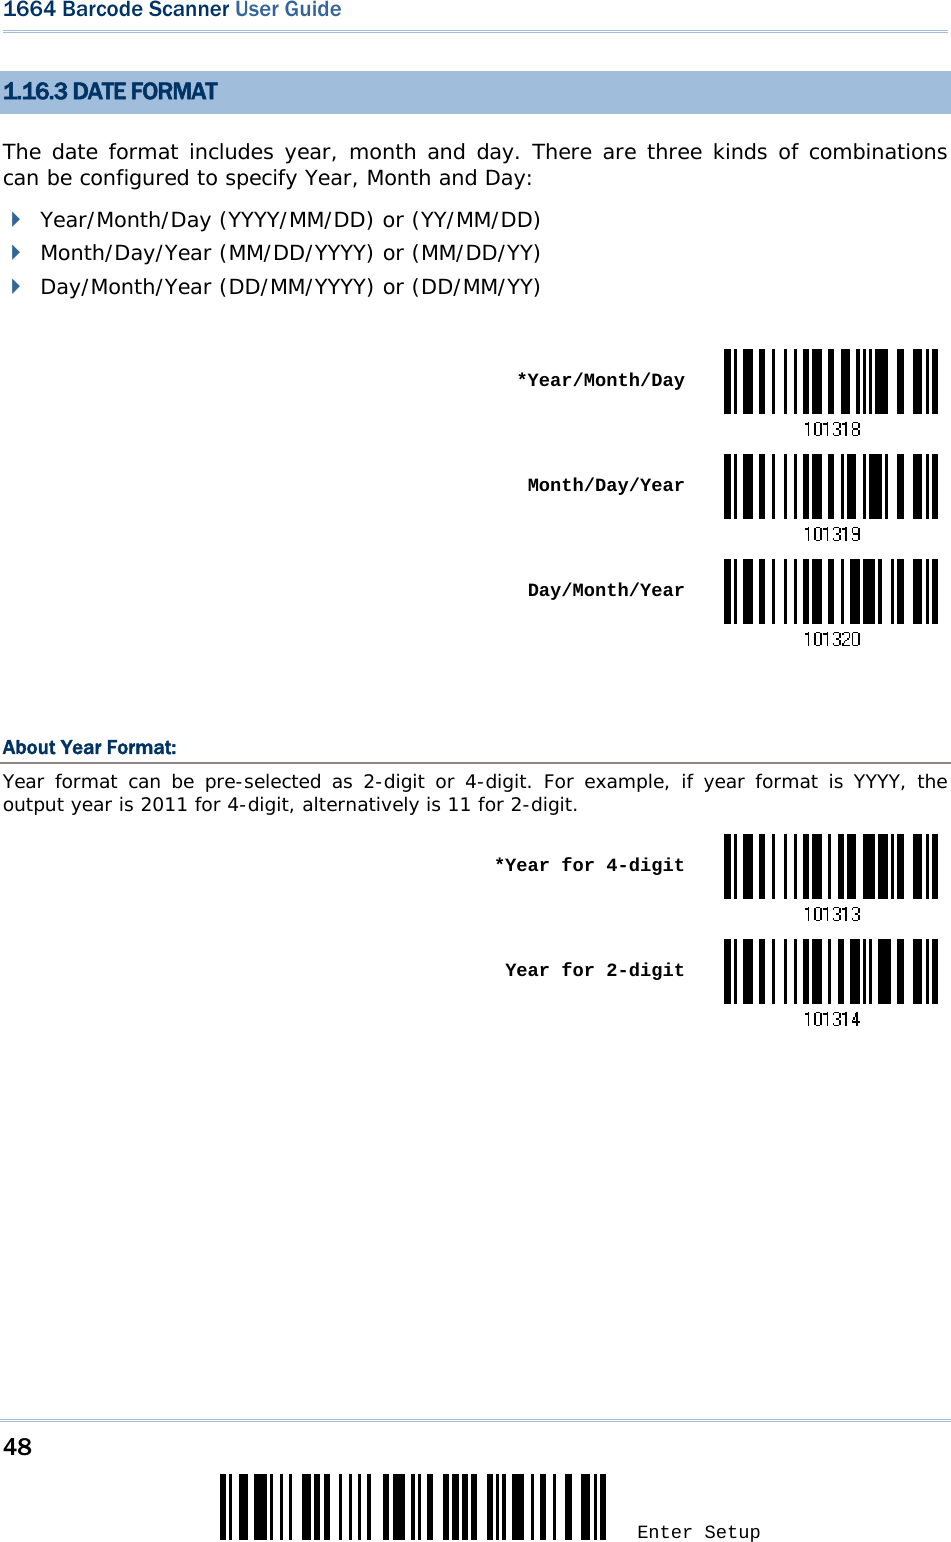 48 Enter Setup 1664 Barcode Scanner User Guide  1.16.3 DATE FORMAT The date format includes year, month and day. There are three kinds of combinations can be configured to specify Year, Month and Day:  Year/Month/Day (YYYY/MM/DD) or (YY/MM/DD)  Month/Day/Year (MM/DD/YYYY) or (MM/DD/YY)  Day/Month/Year (DD/MM/YYYY) or (DD/MM/YY)   *Year/Month/Day Month/Day/Year Day/Month/Year  About Year Format: Year format can be pre-selected as 2-digit or 4-digit. For example, if year format is YYYY, the output year is 2011 for 4-digit, alternatively is 11 for 2-digit.  *Year for 4-digit Year for 2-digit   